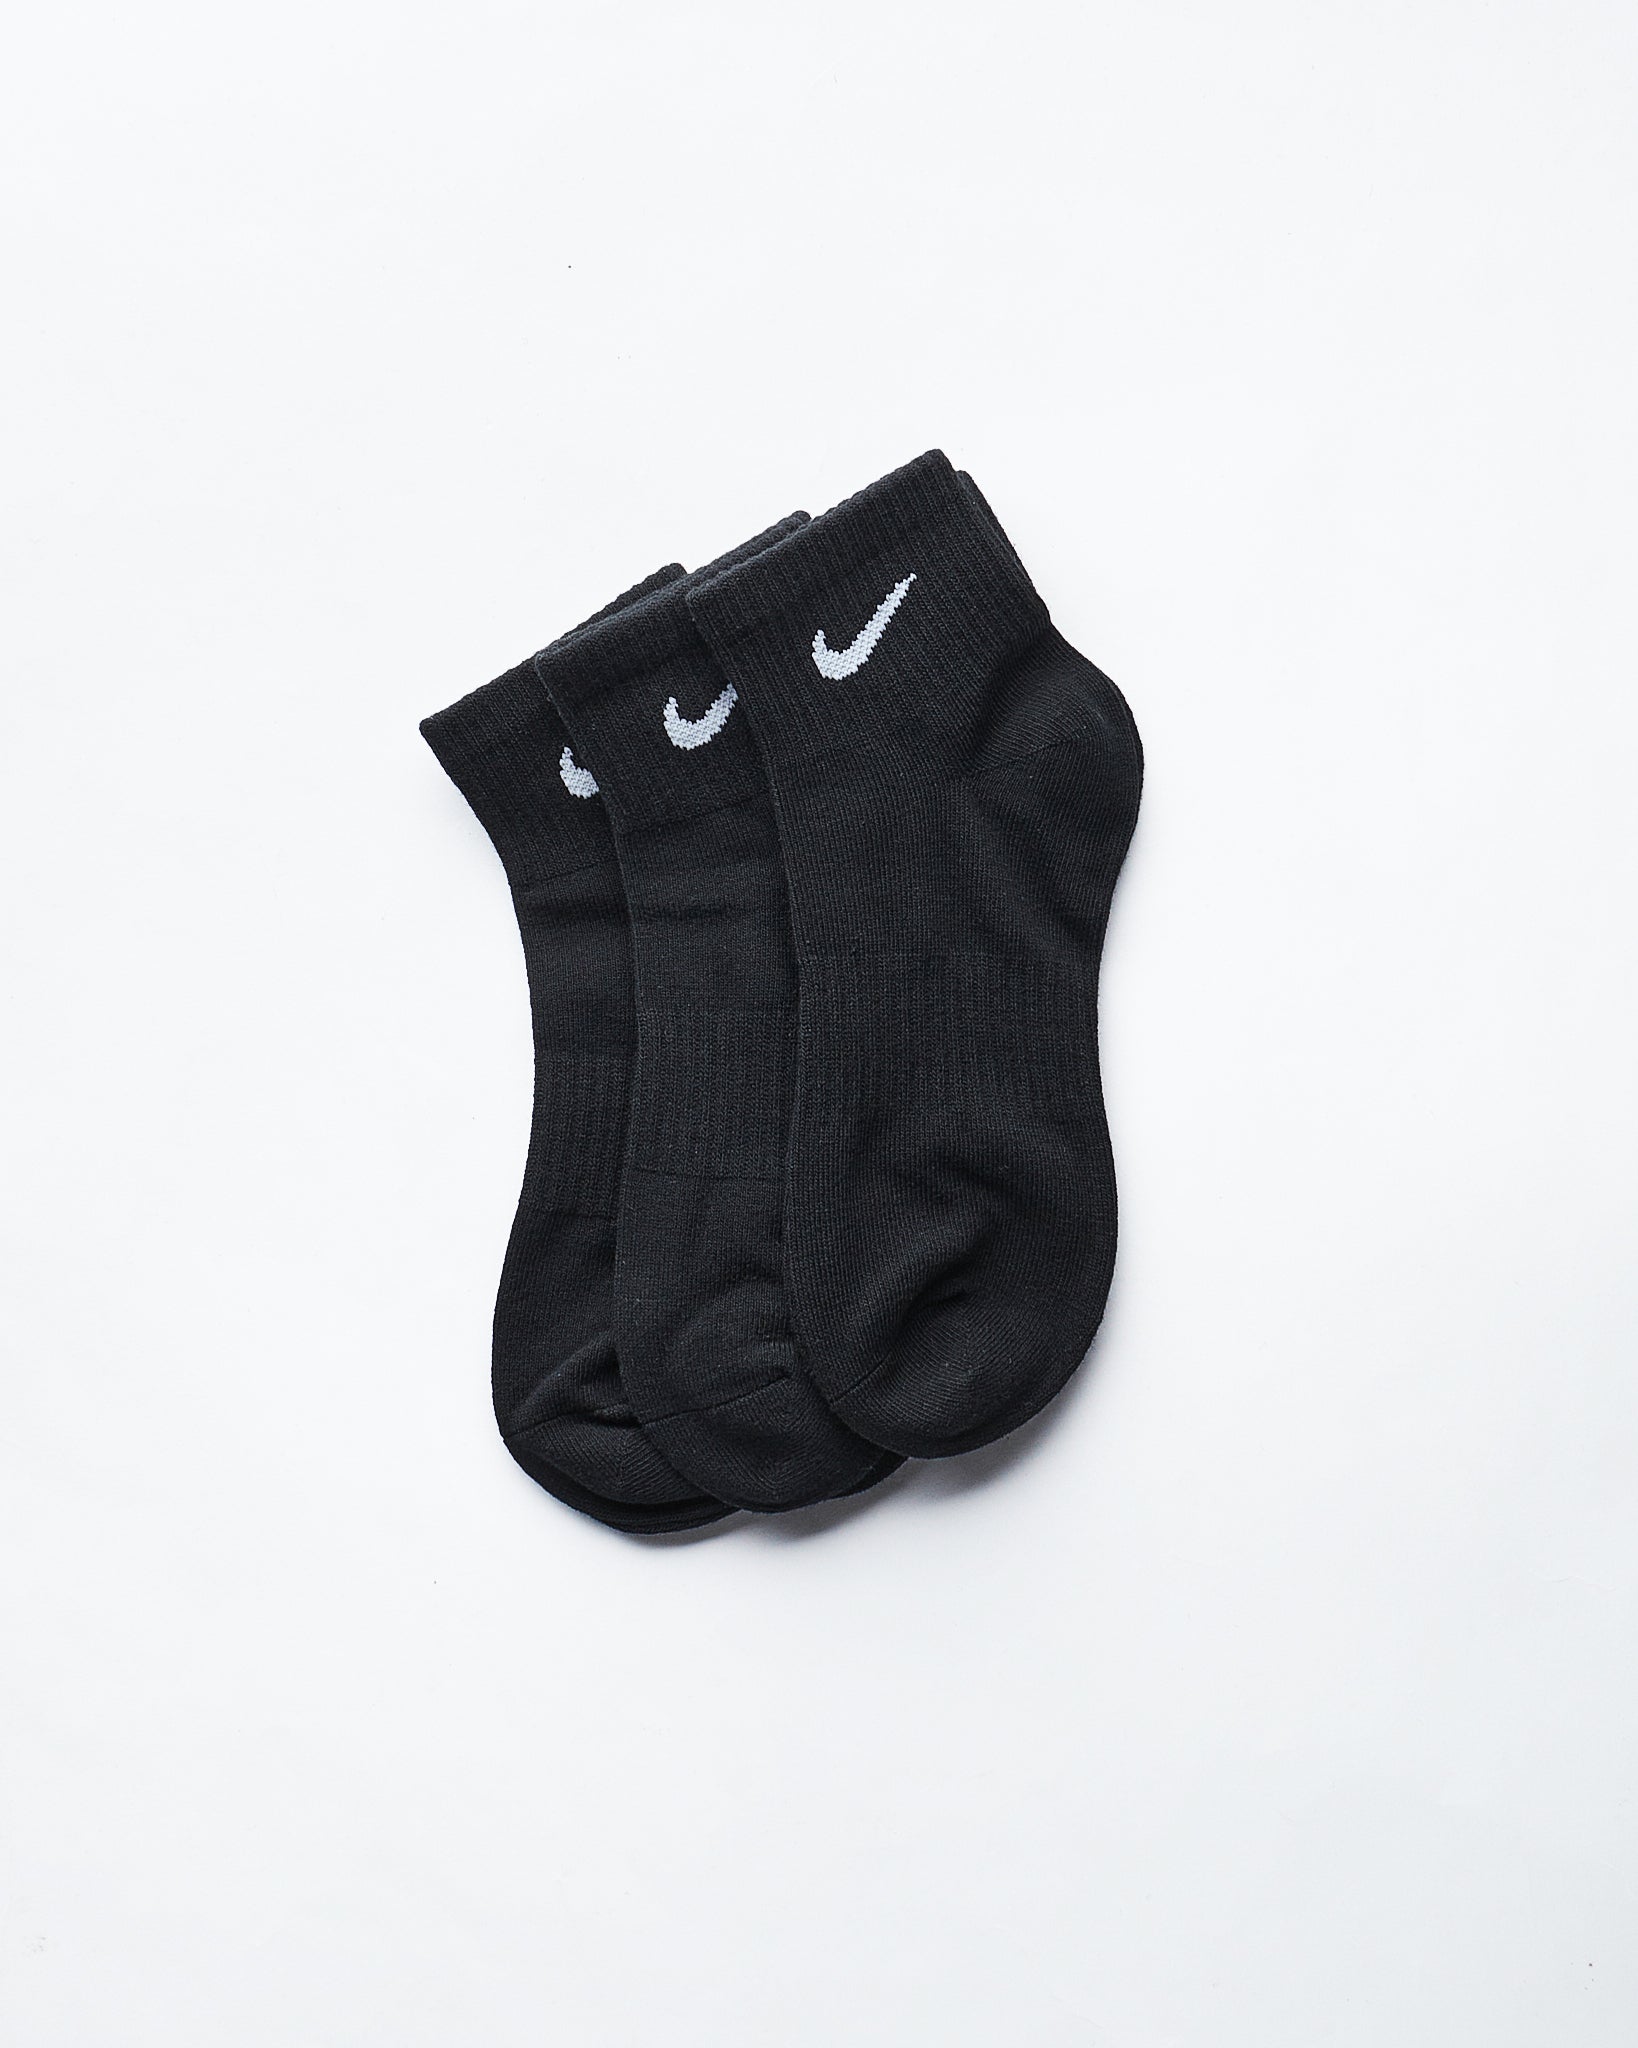 MOI OUTFIT-Logo Embroidered Quarter 3 Pairs Socks 8.50